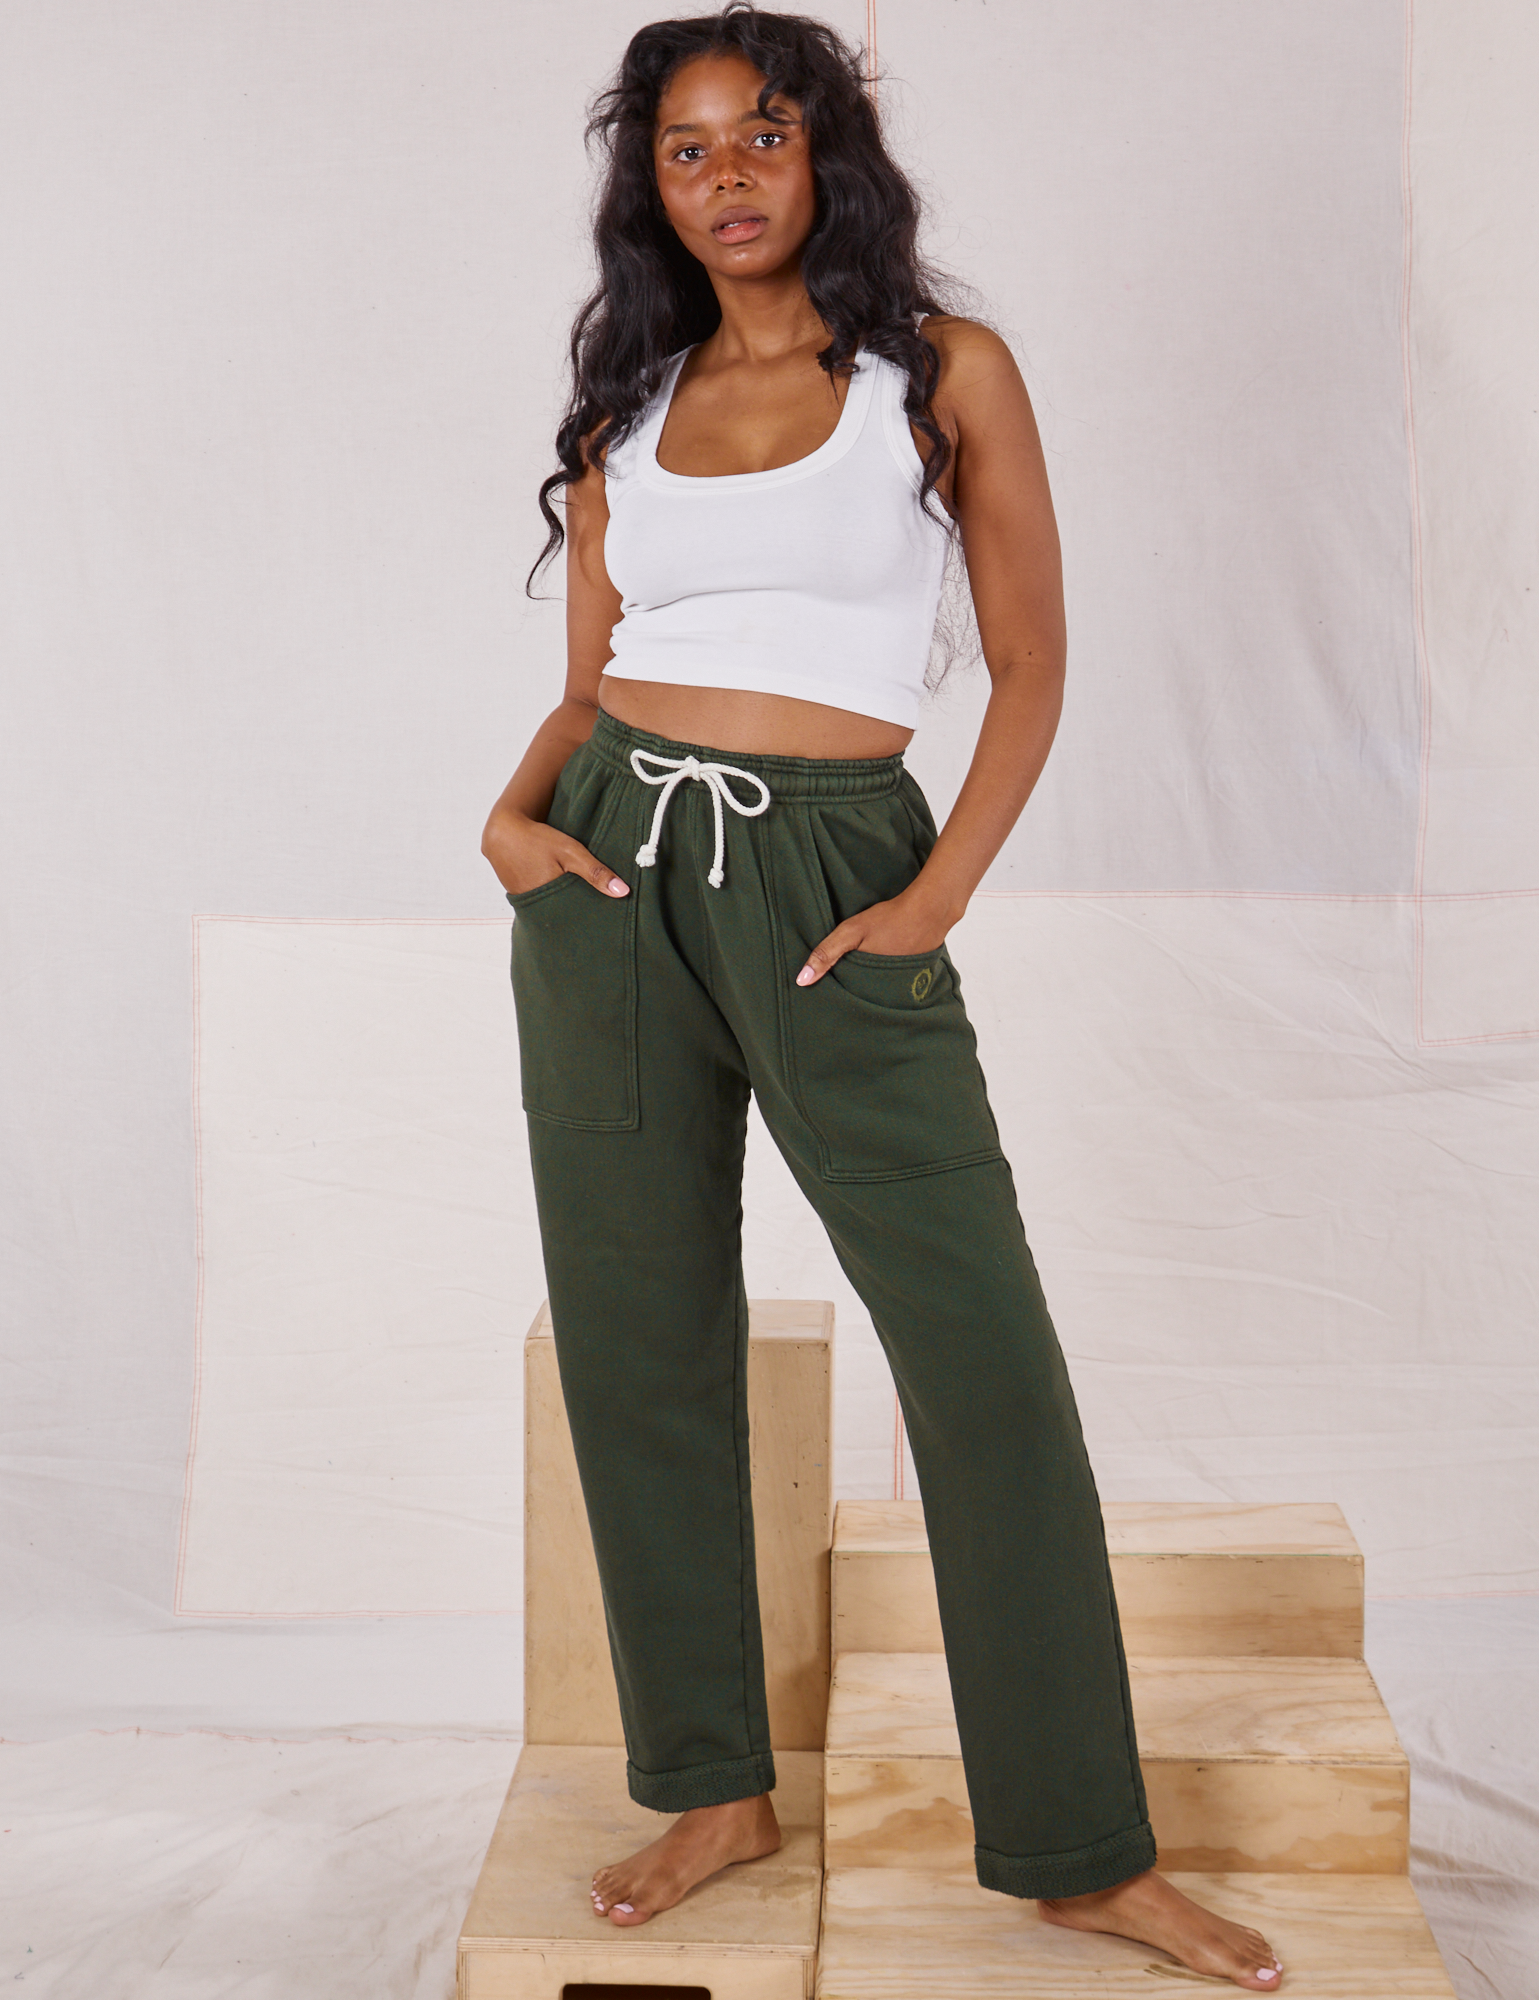 Kandia is 5&#39;3&quot; and wearing P Rolled Cuff Sweat Pants in Swamp Green paired with vintage off-white Cropped Tank Top